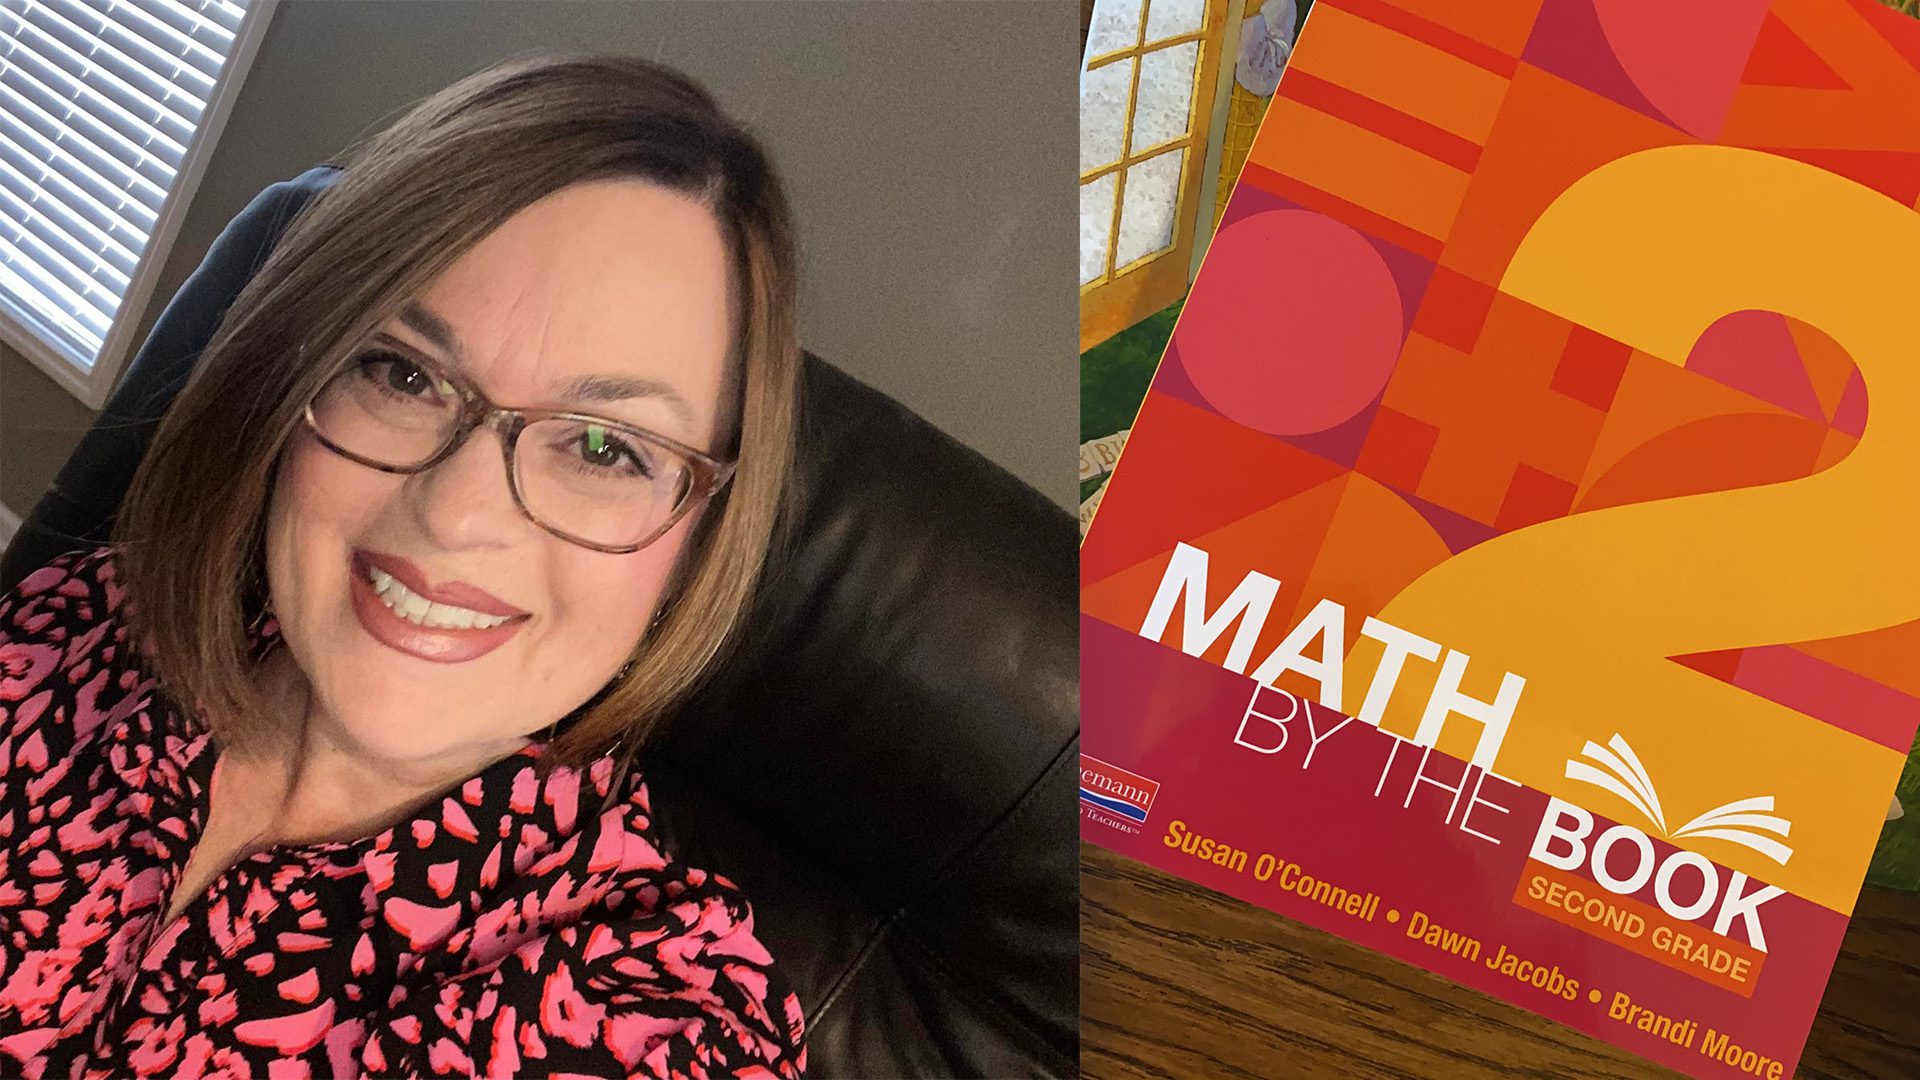 Head shot of Dawn Jacobs and front cover of Math by the Book